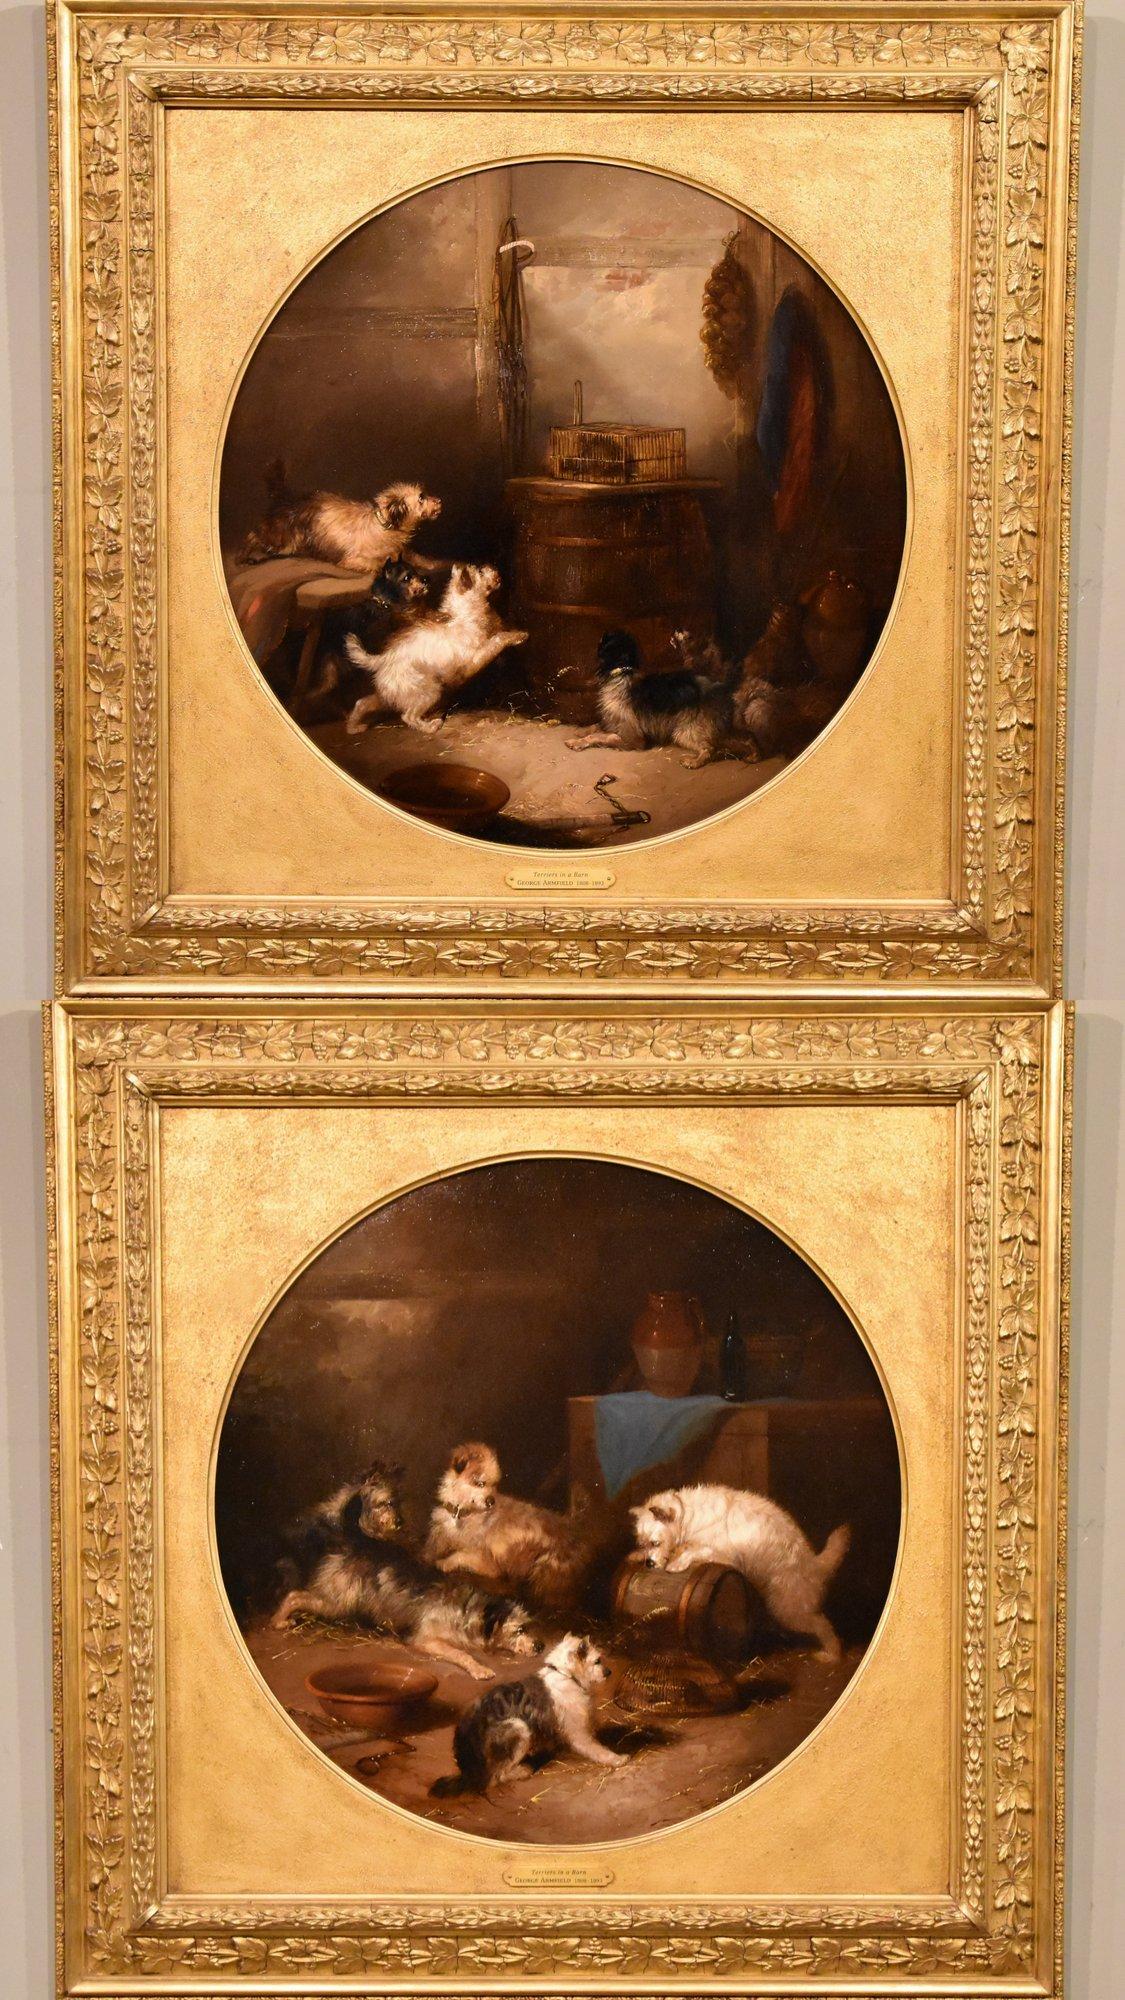 Oil Painting Pair by George Armfield "Terriers in a Barn" 1808 - 1893 London painter of dogs, especially terriers. He exhibited at the Royal Academy, R.B.A and British Institution. Both Oil on Canvas. Original Frames. 

Dimensions unframed 21 x 21